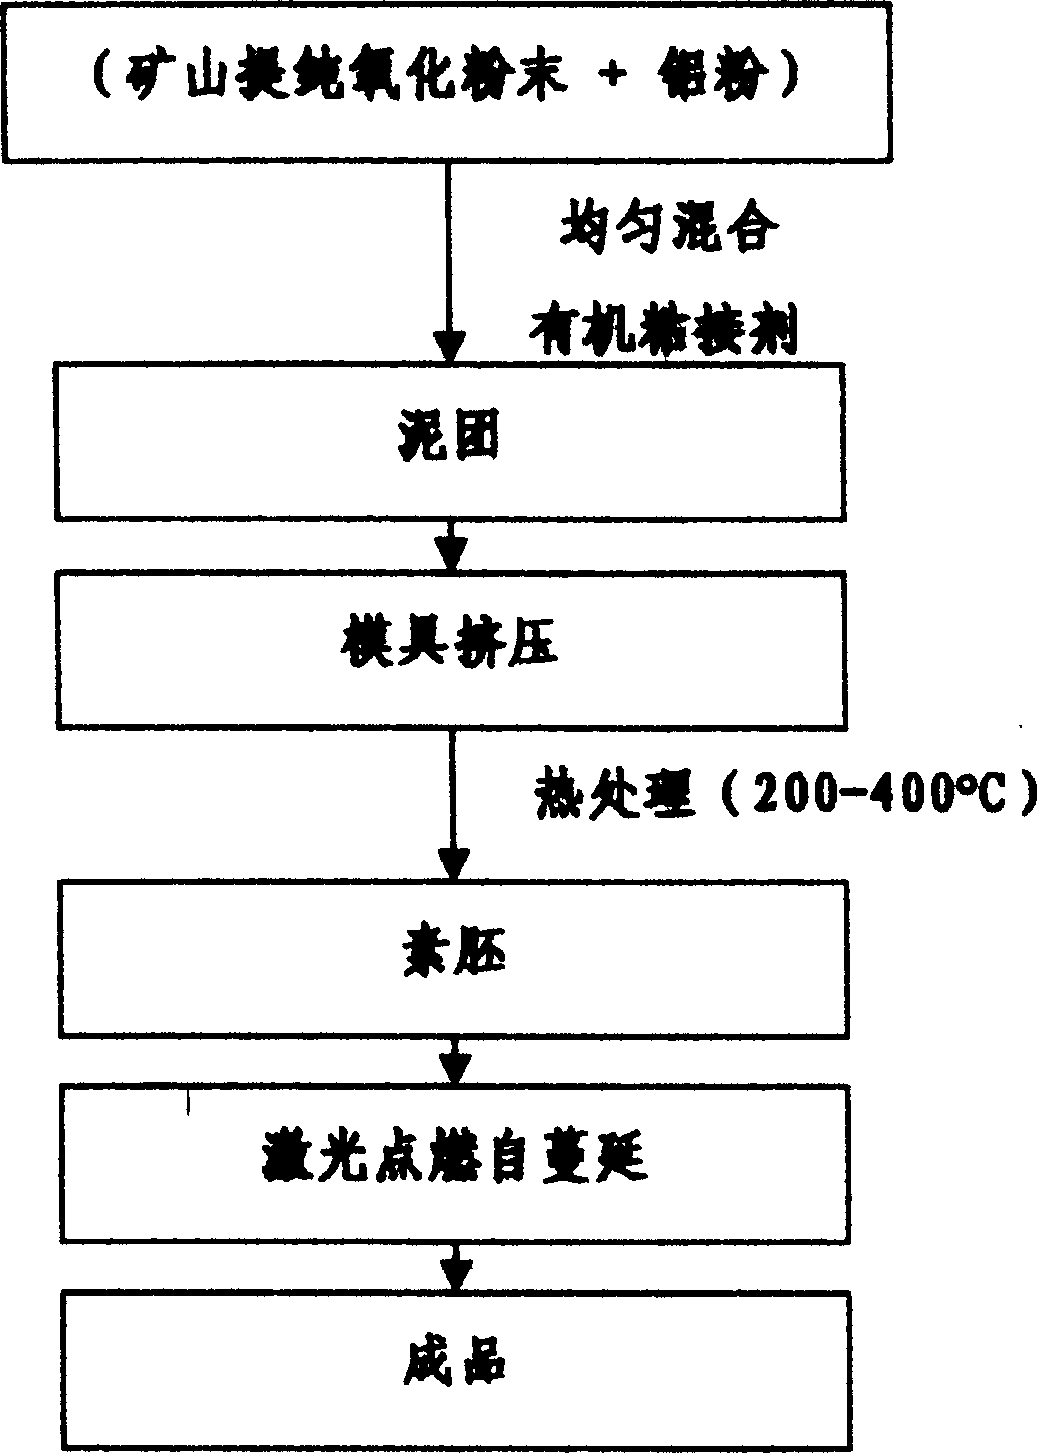 Conductive honey comb ceramic catalyst carrier and its preparation method